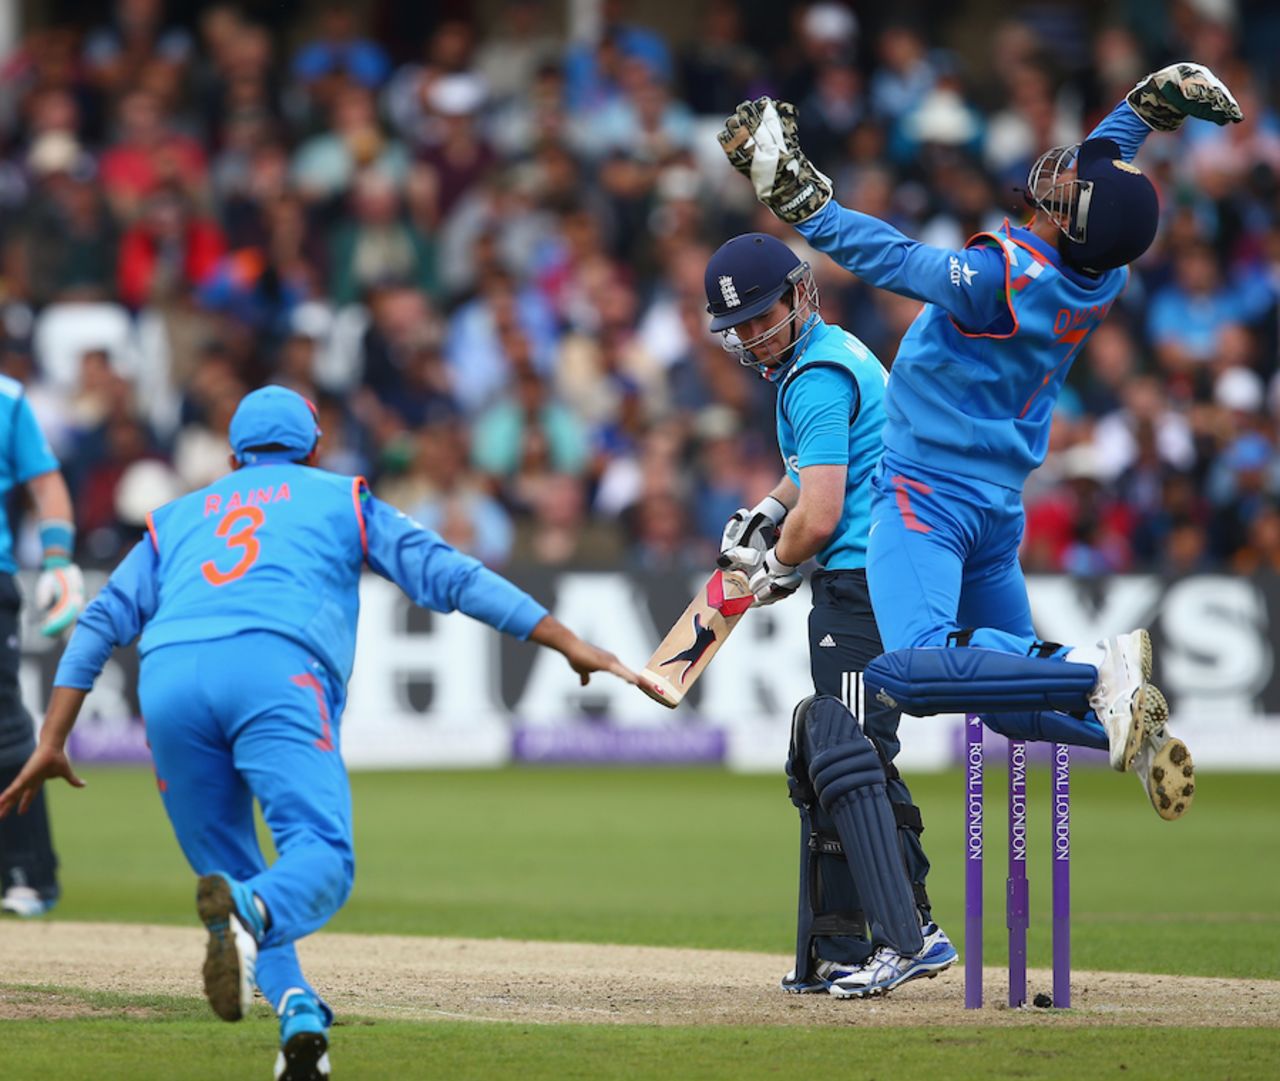 MS Dhoni leaps in the air after taking an edge off Eoin Morgan's bat, England v India, 3rd ODI, Trent Bridge, August 30, 2014